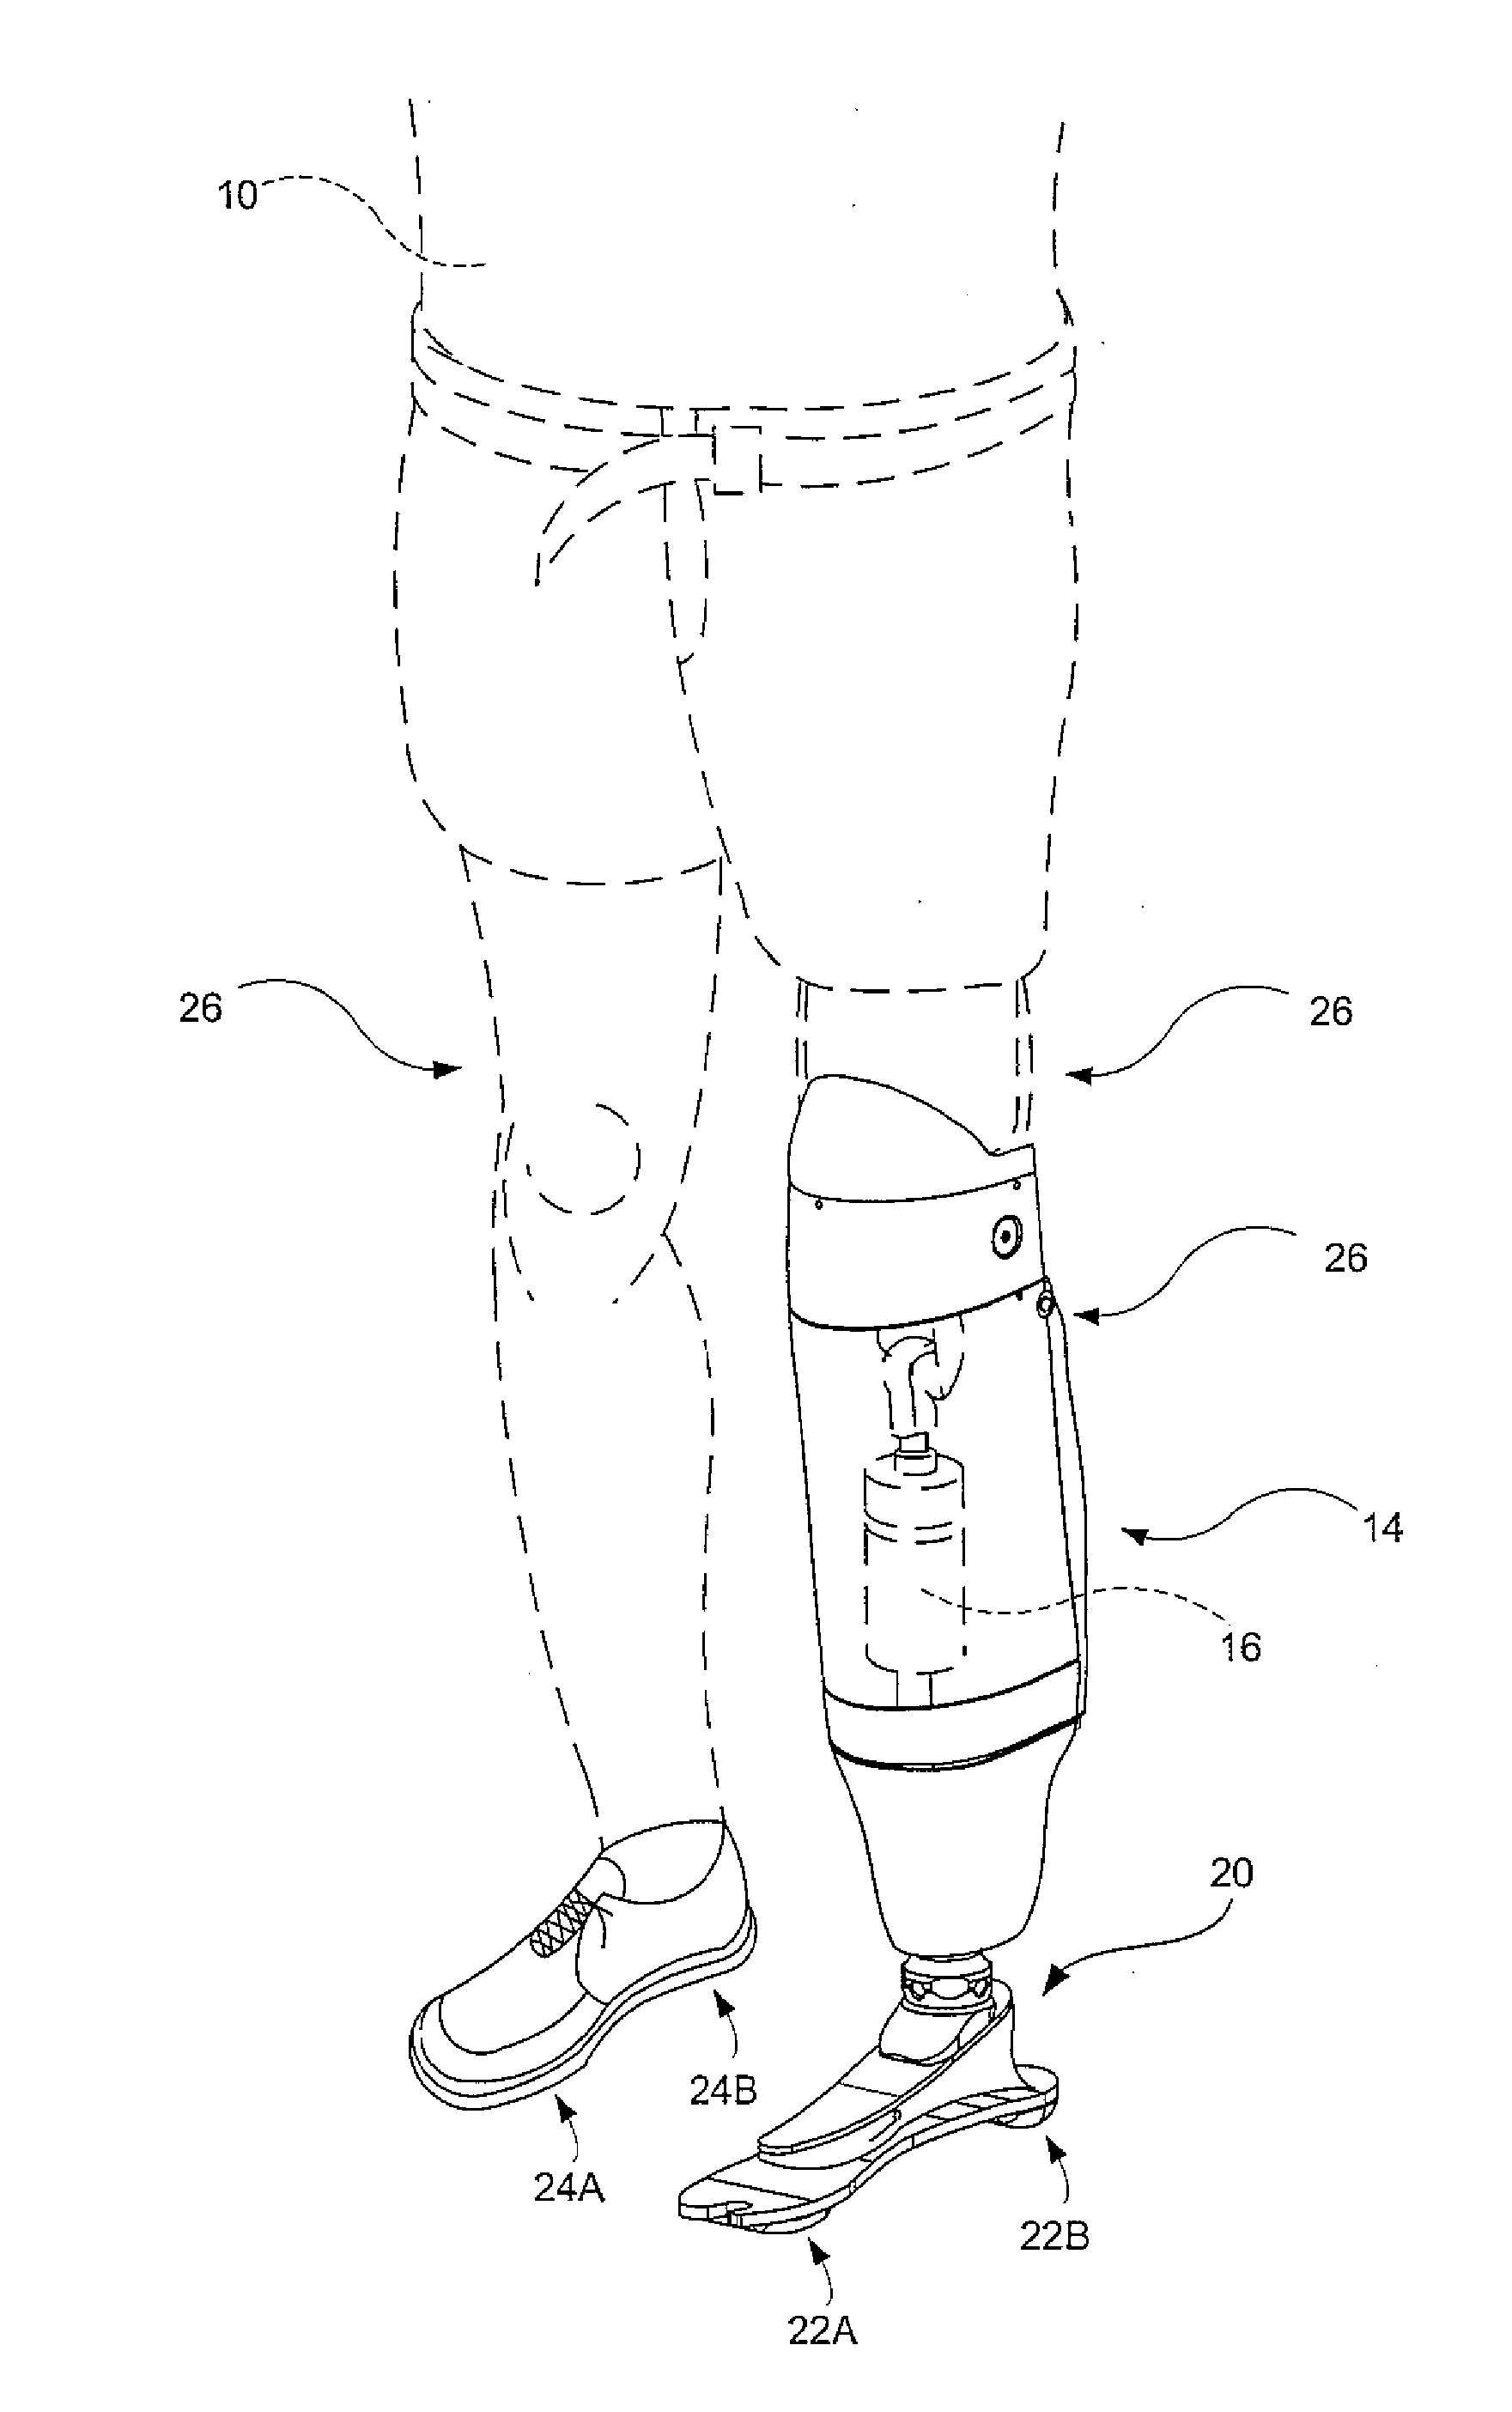 Instrumented prosthetic foot